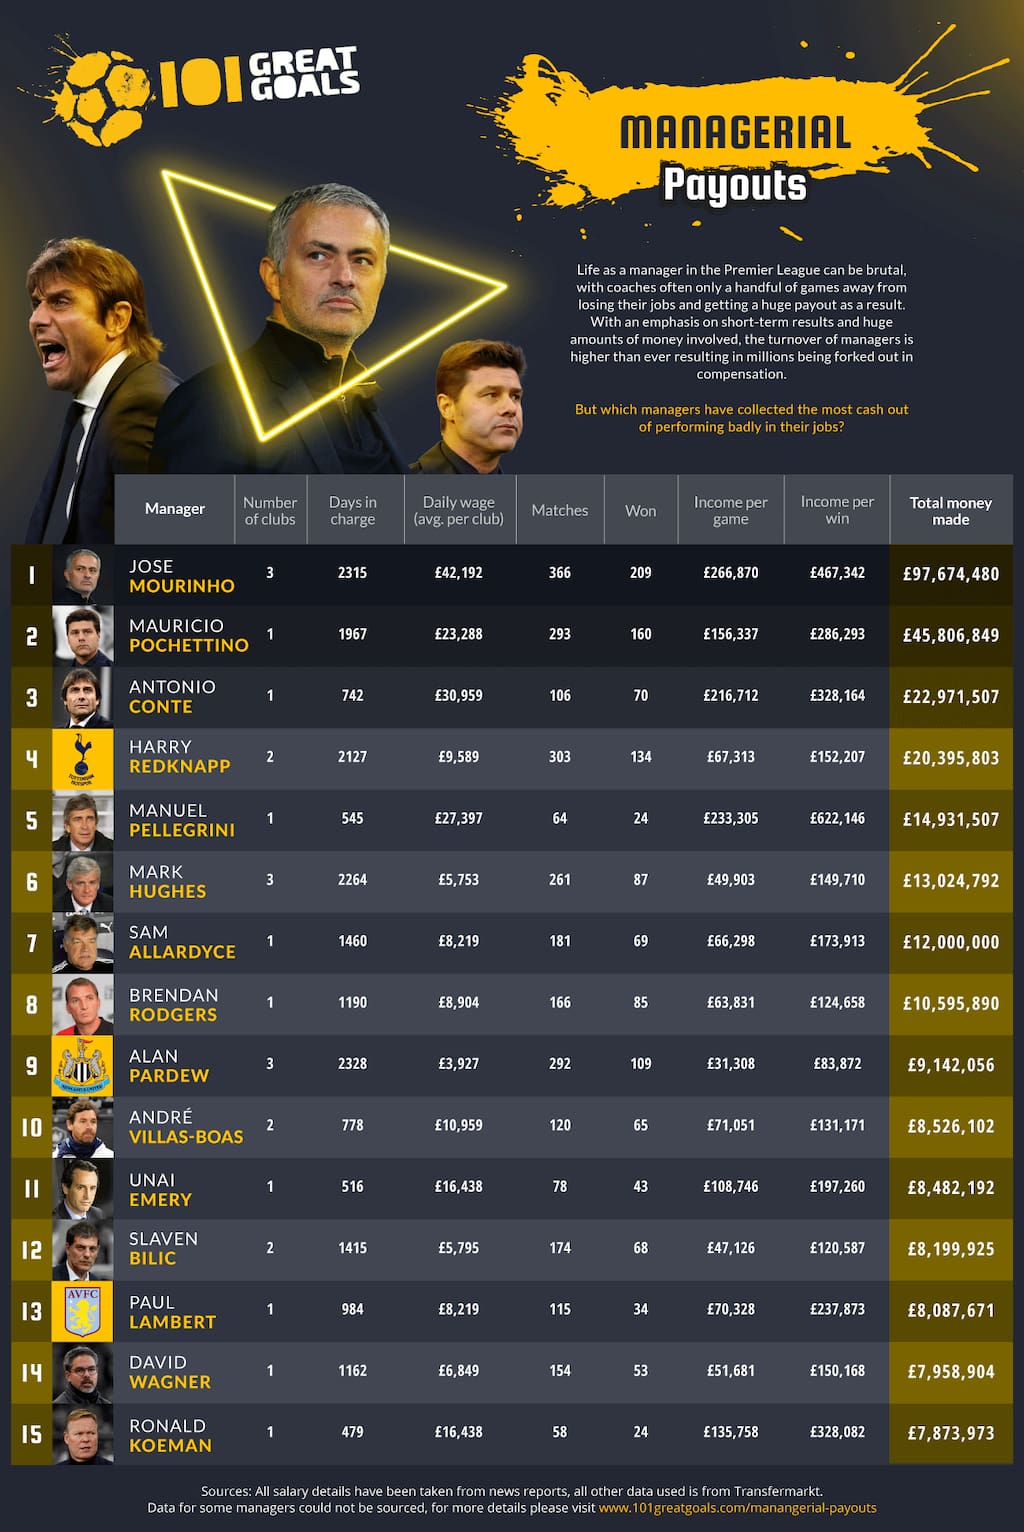 Jose Mourinho has been paid the most in the Premier League